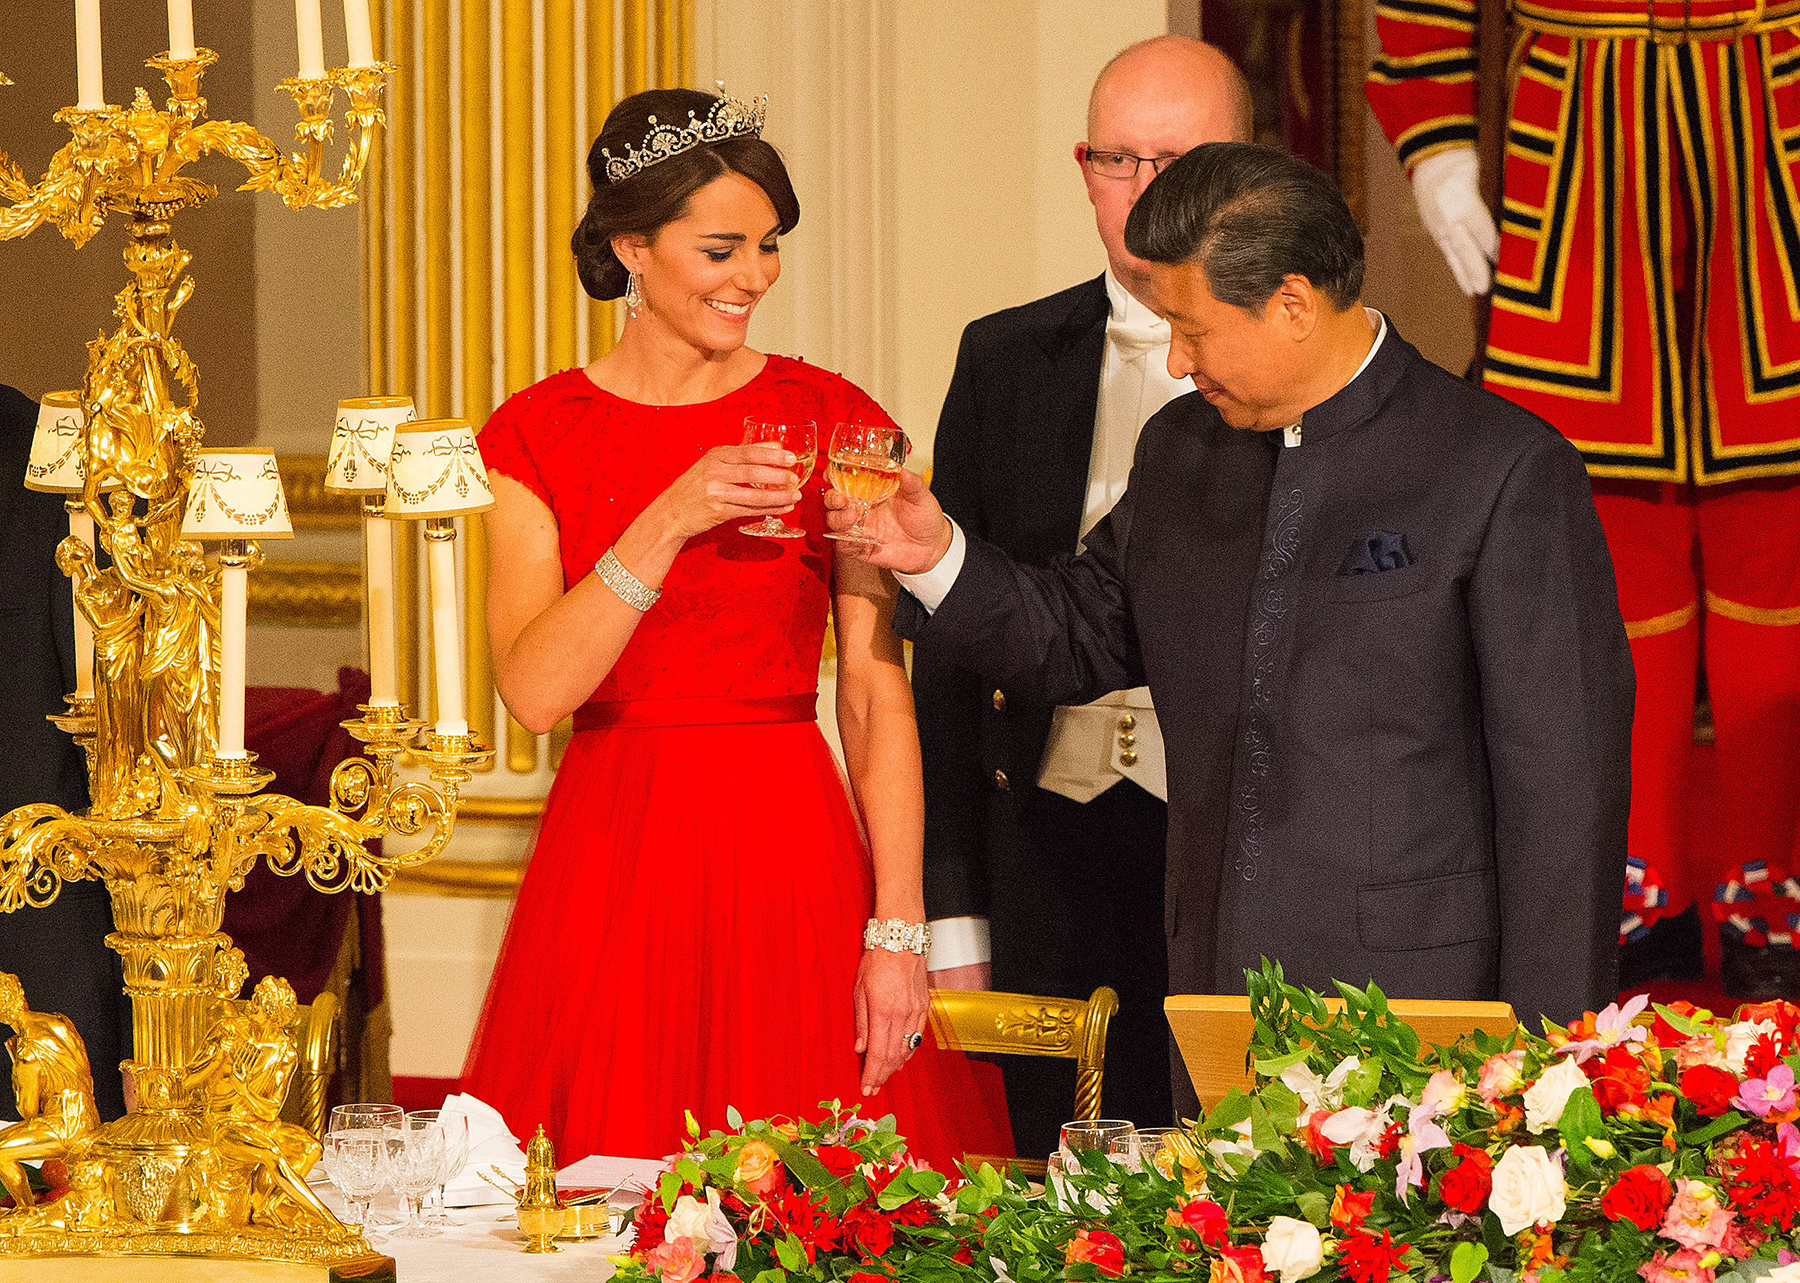 The 13 rules Kate Middleton swears by when hosting a party